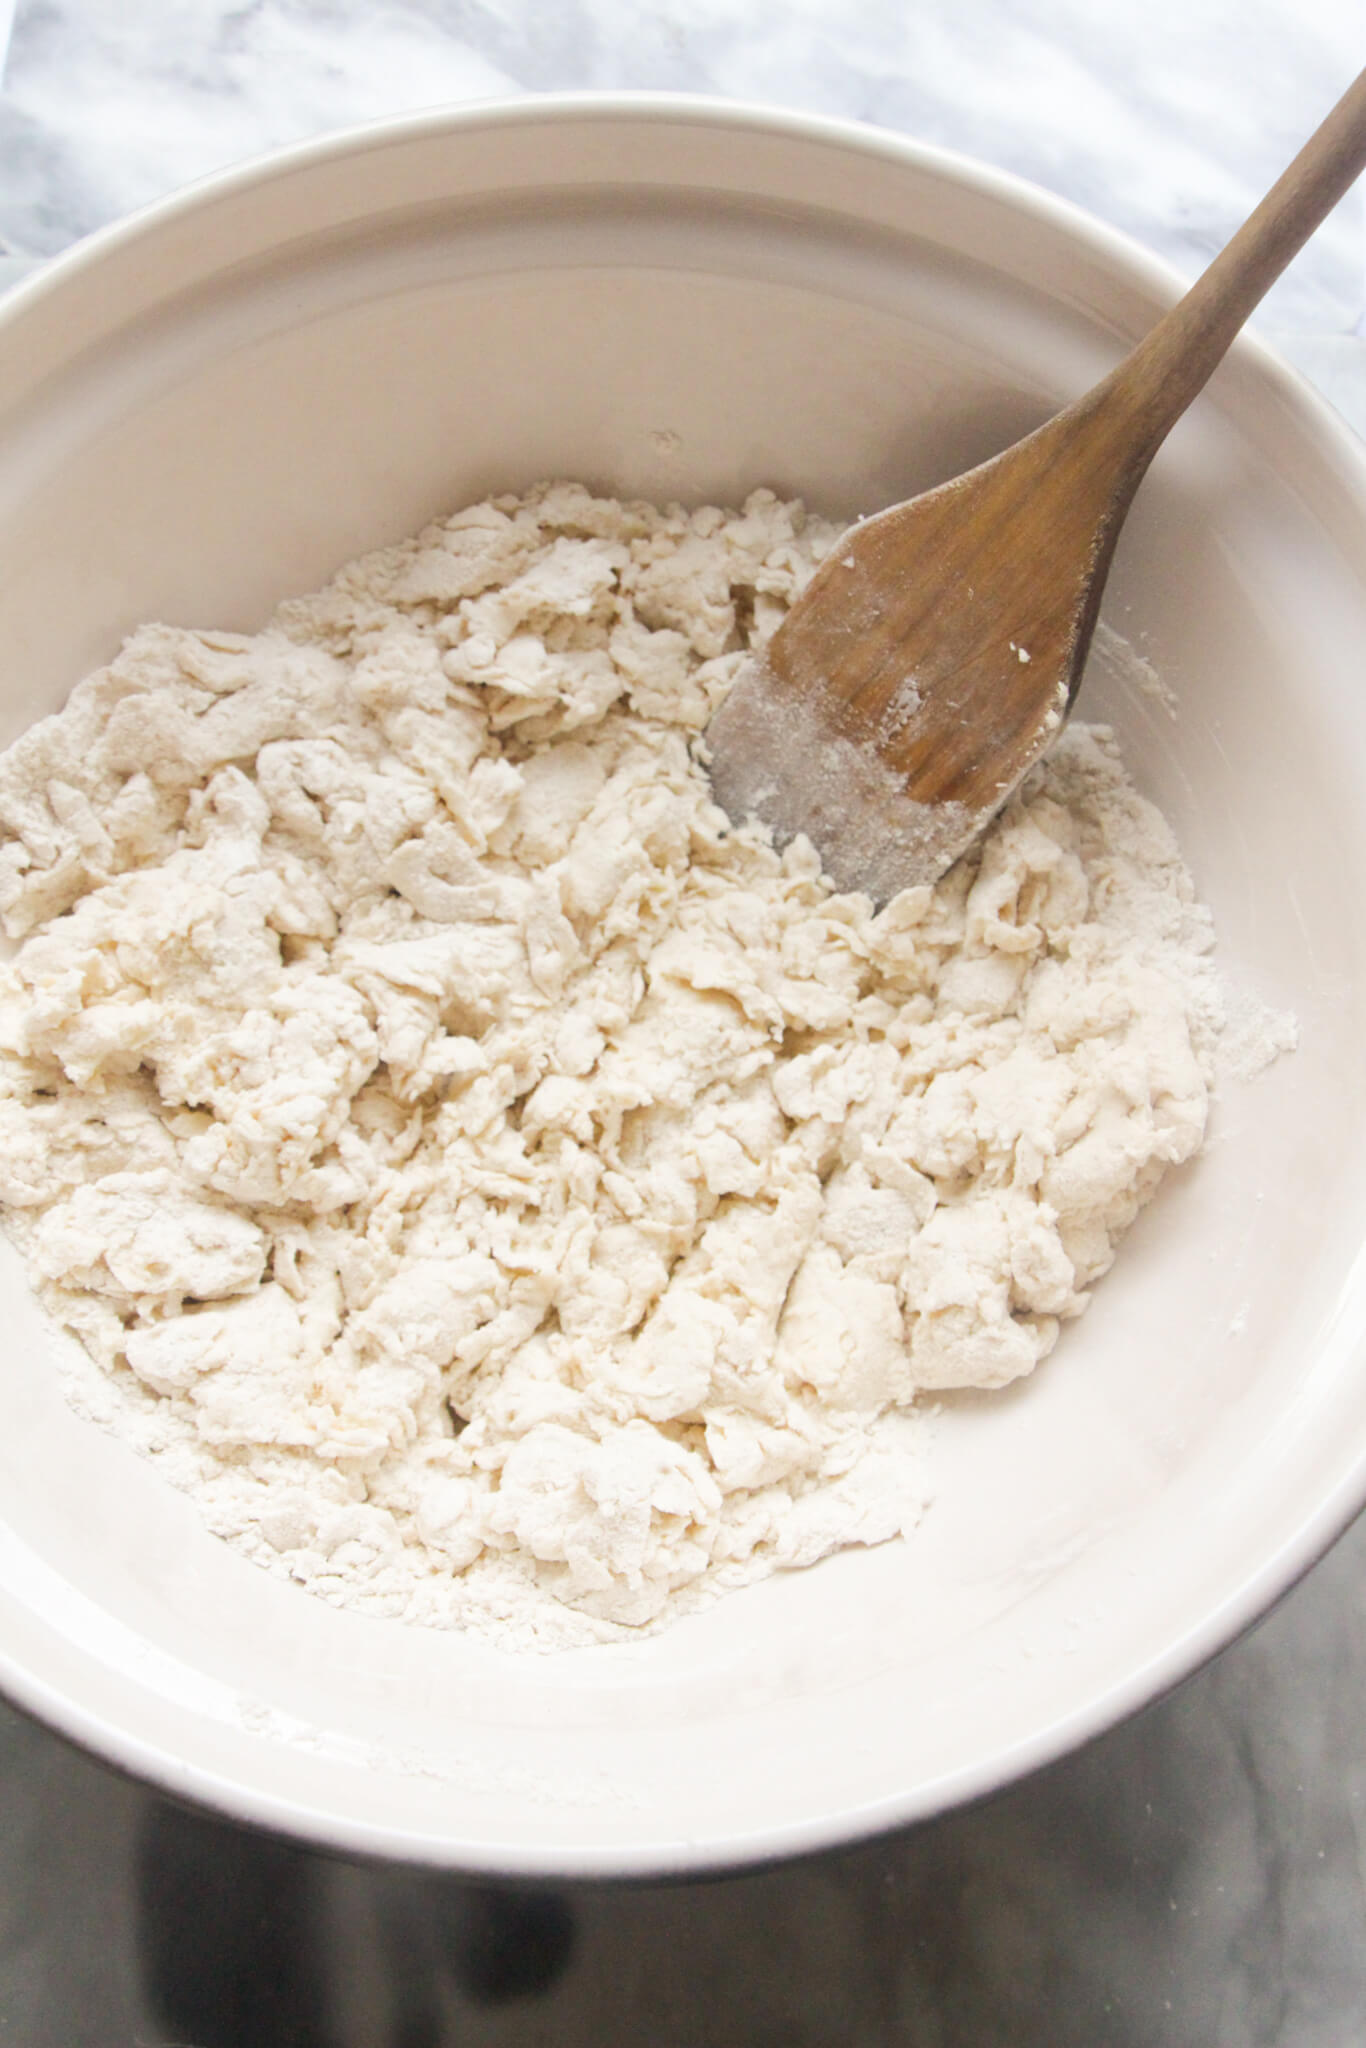 Lumpy mixed flour and yogurt dough in a large white mixing bowl with a wooden spatula inside.